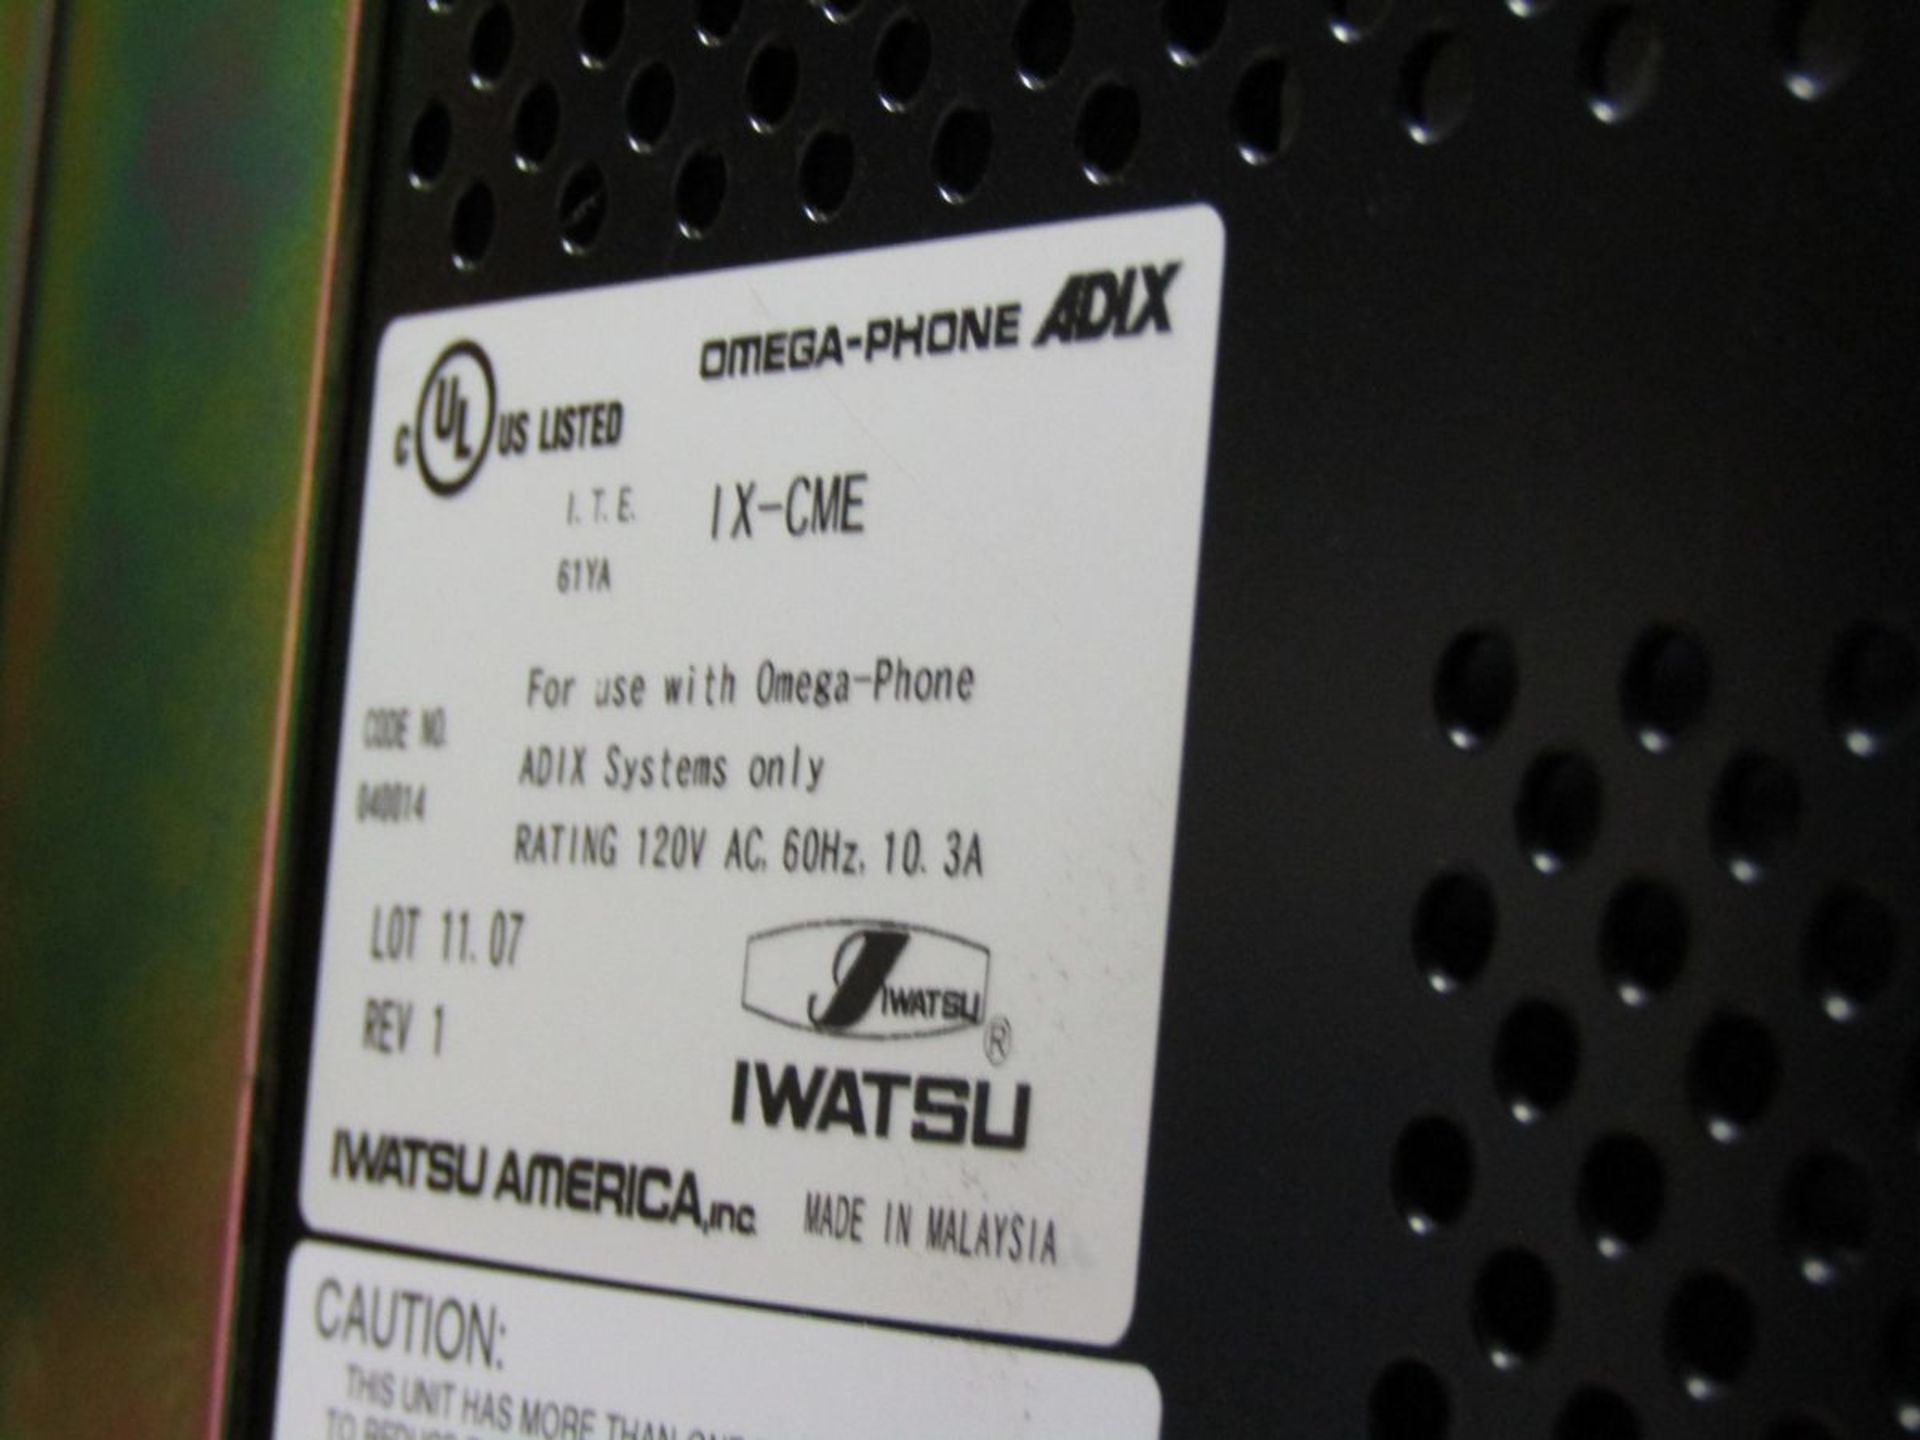 Lot - (2) Iwatsu IX-CME Omega-Phone ADIX Systems; with (10) Iwatsu Phones - (Located In: Bedford - Image 5 of 7